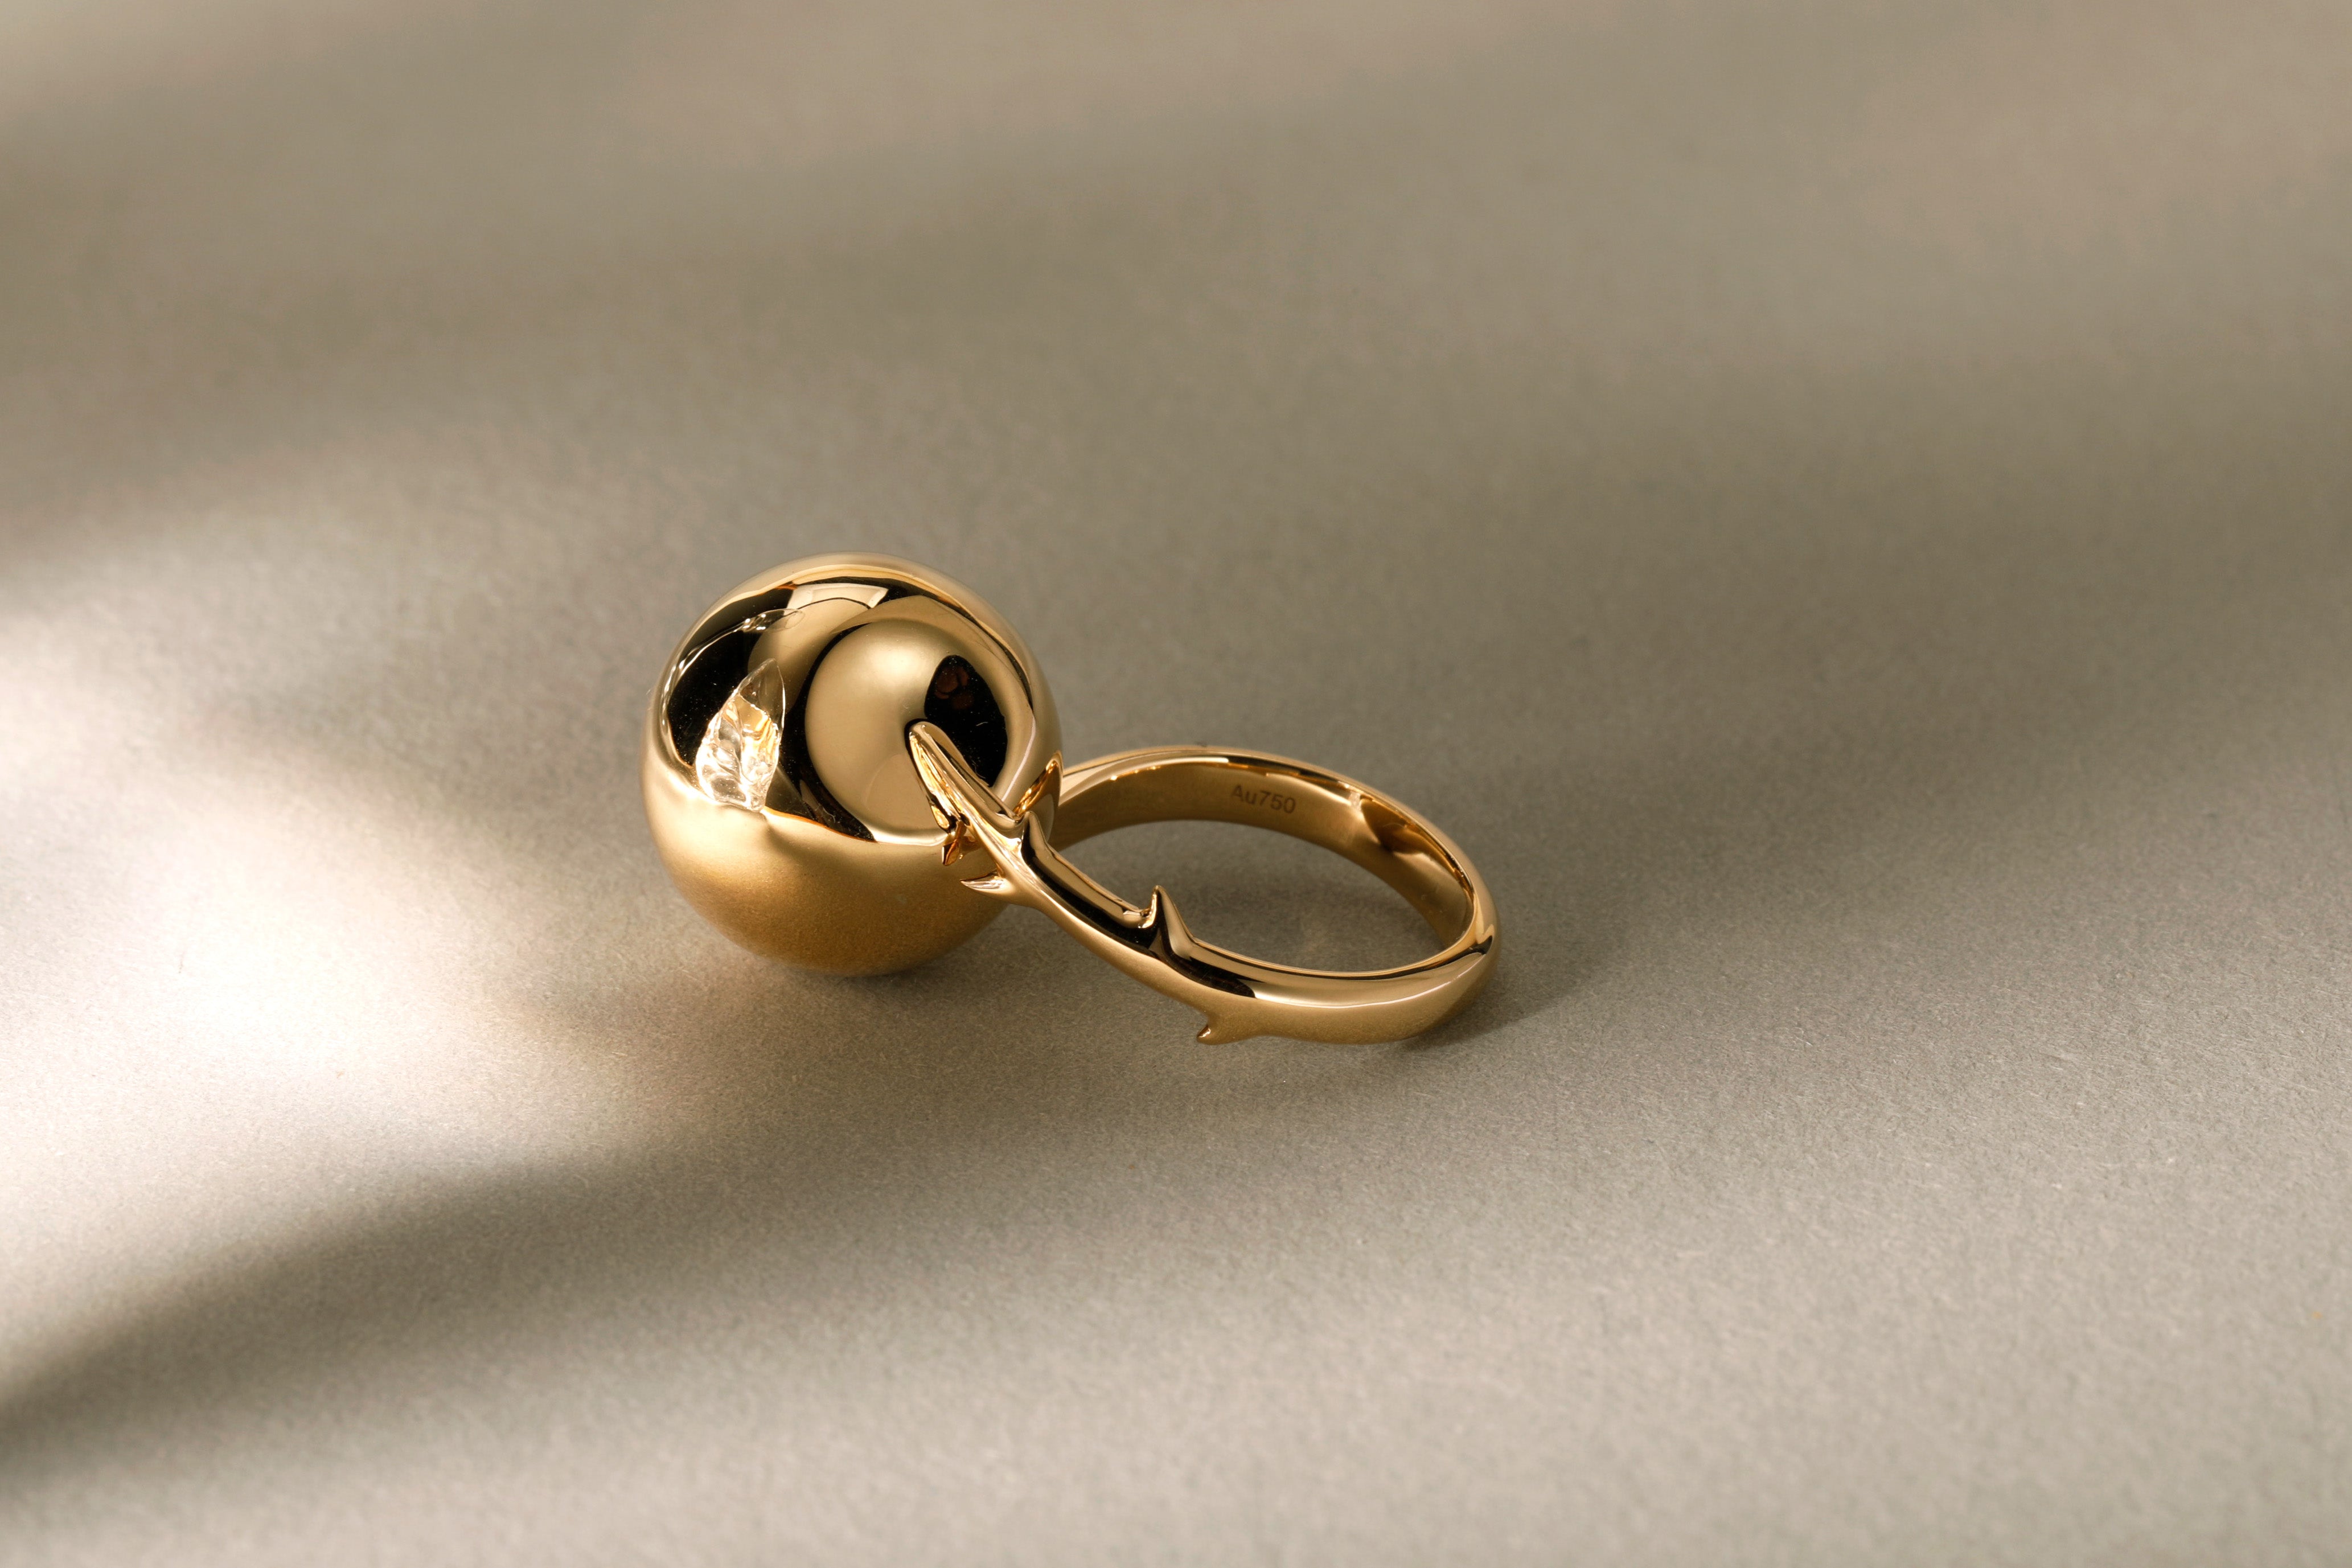 The "Pearl Ring"